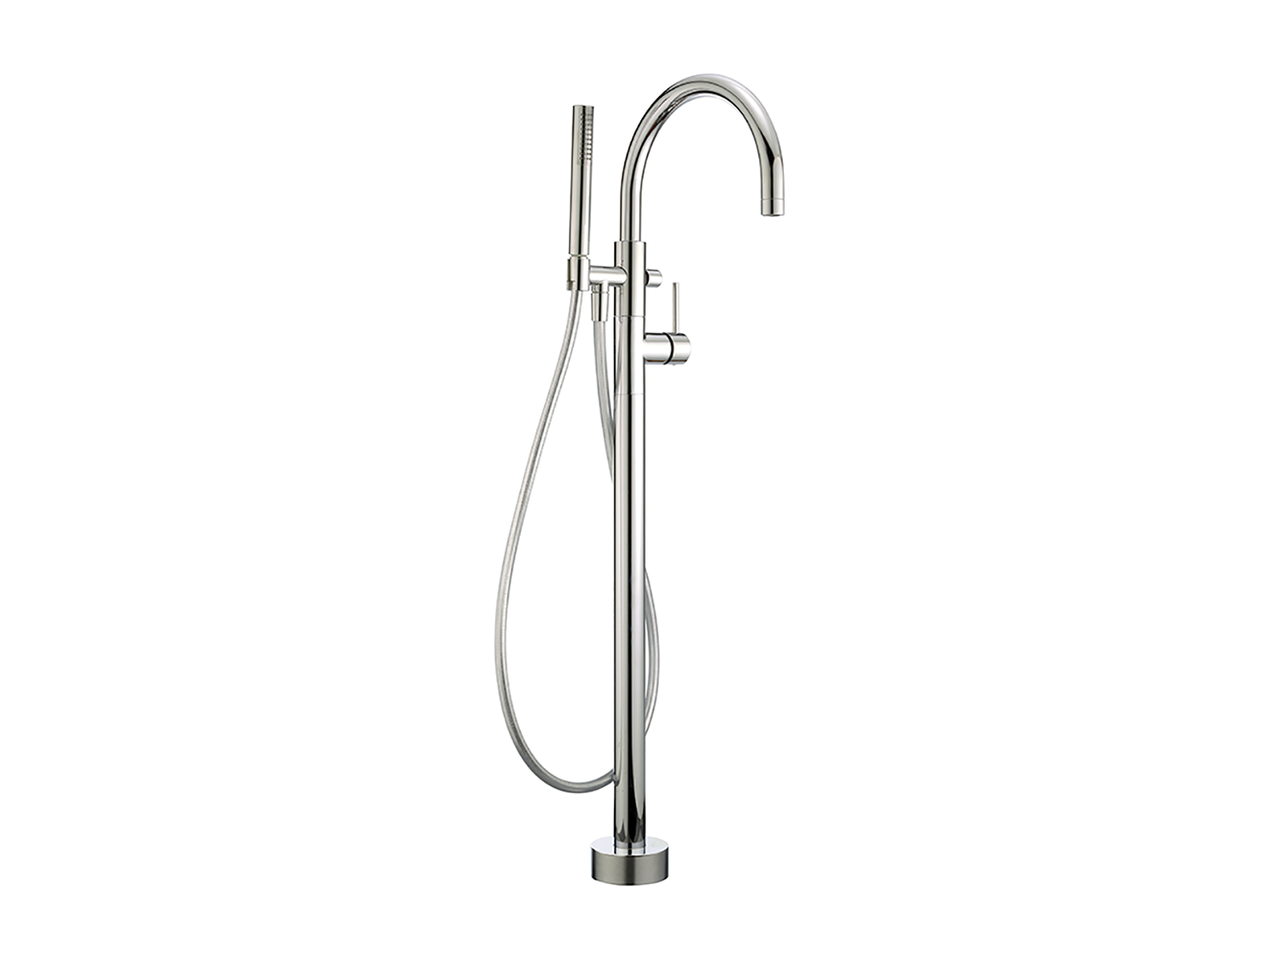 Exposed part for single-lever bath shower mixer TRATTO EVO - v1